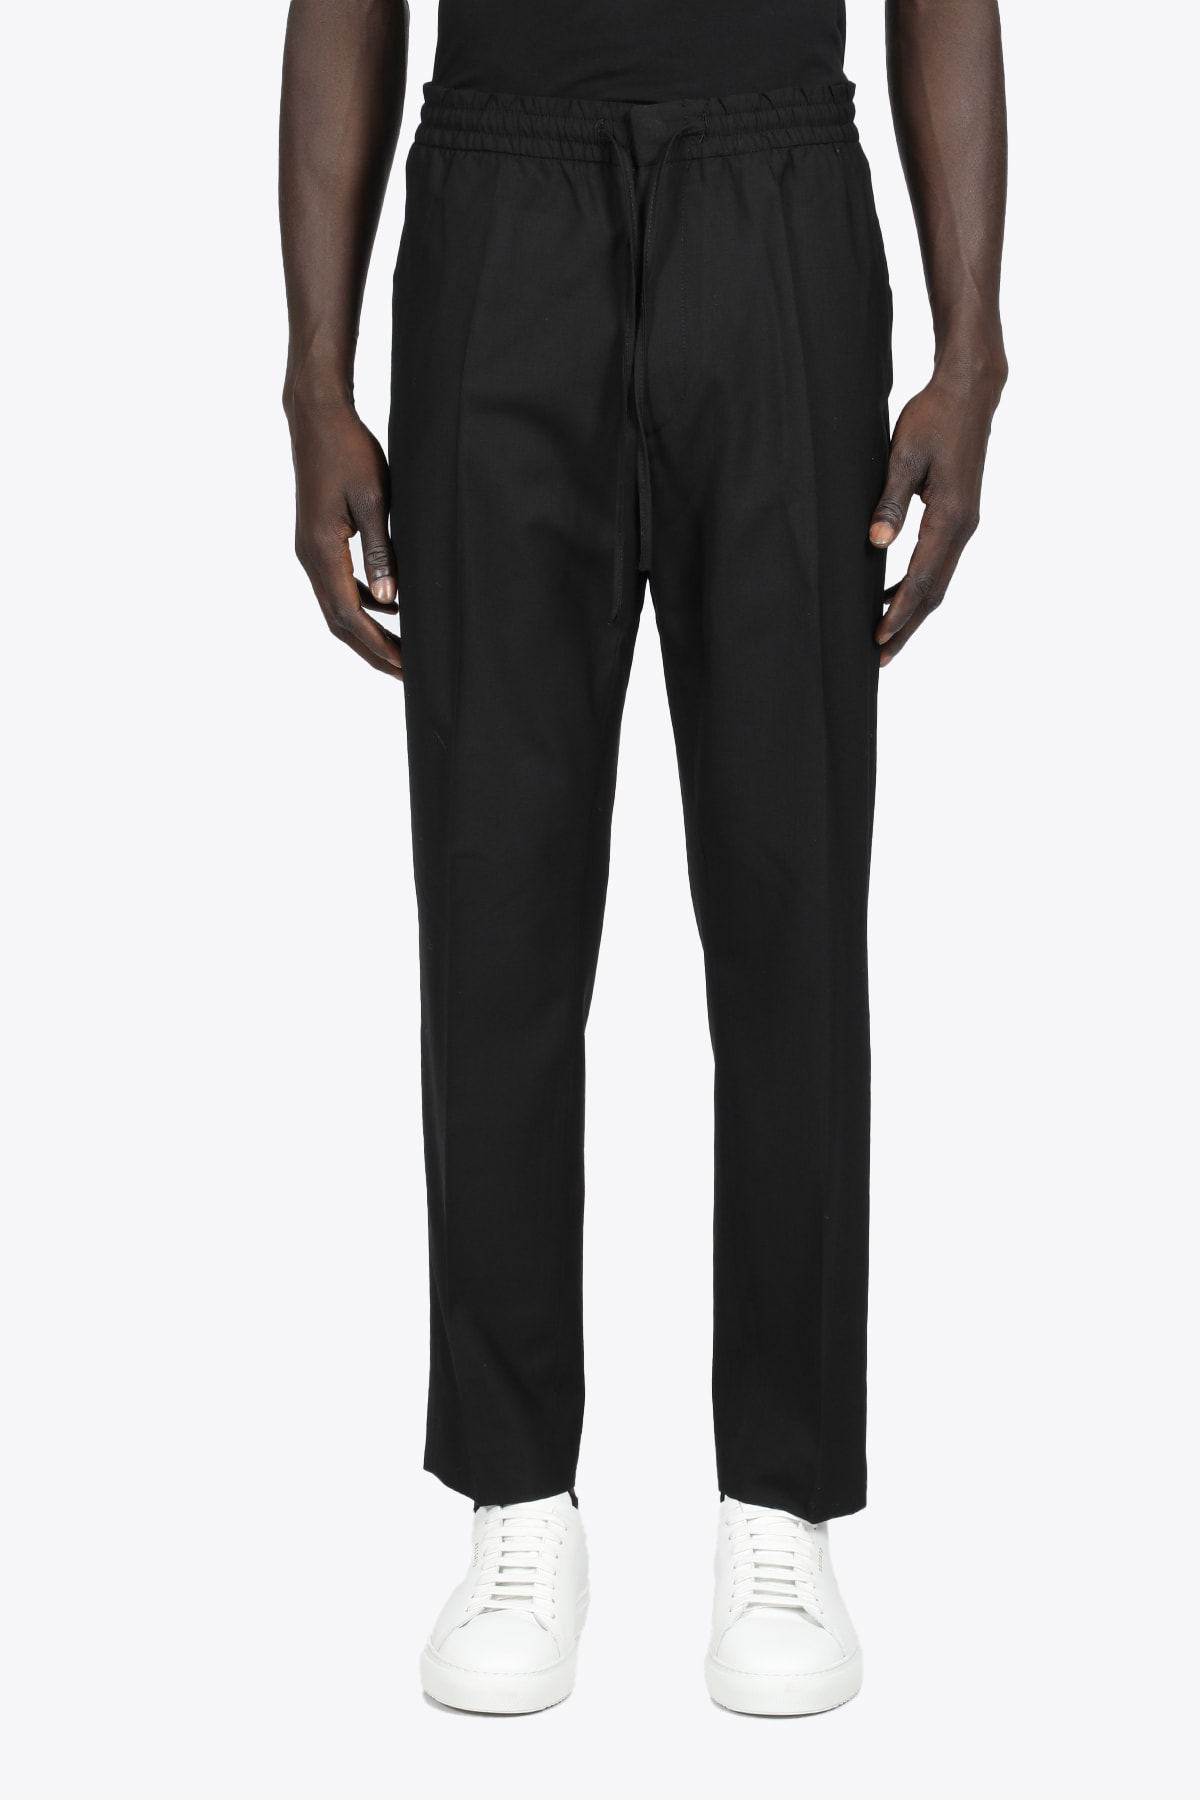 CMMN SWDN Tapered Drawstring Trousers Black wool tapered drawstring trousers